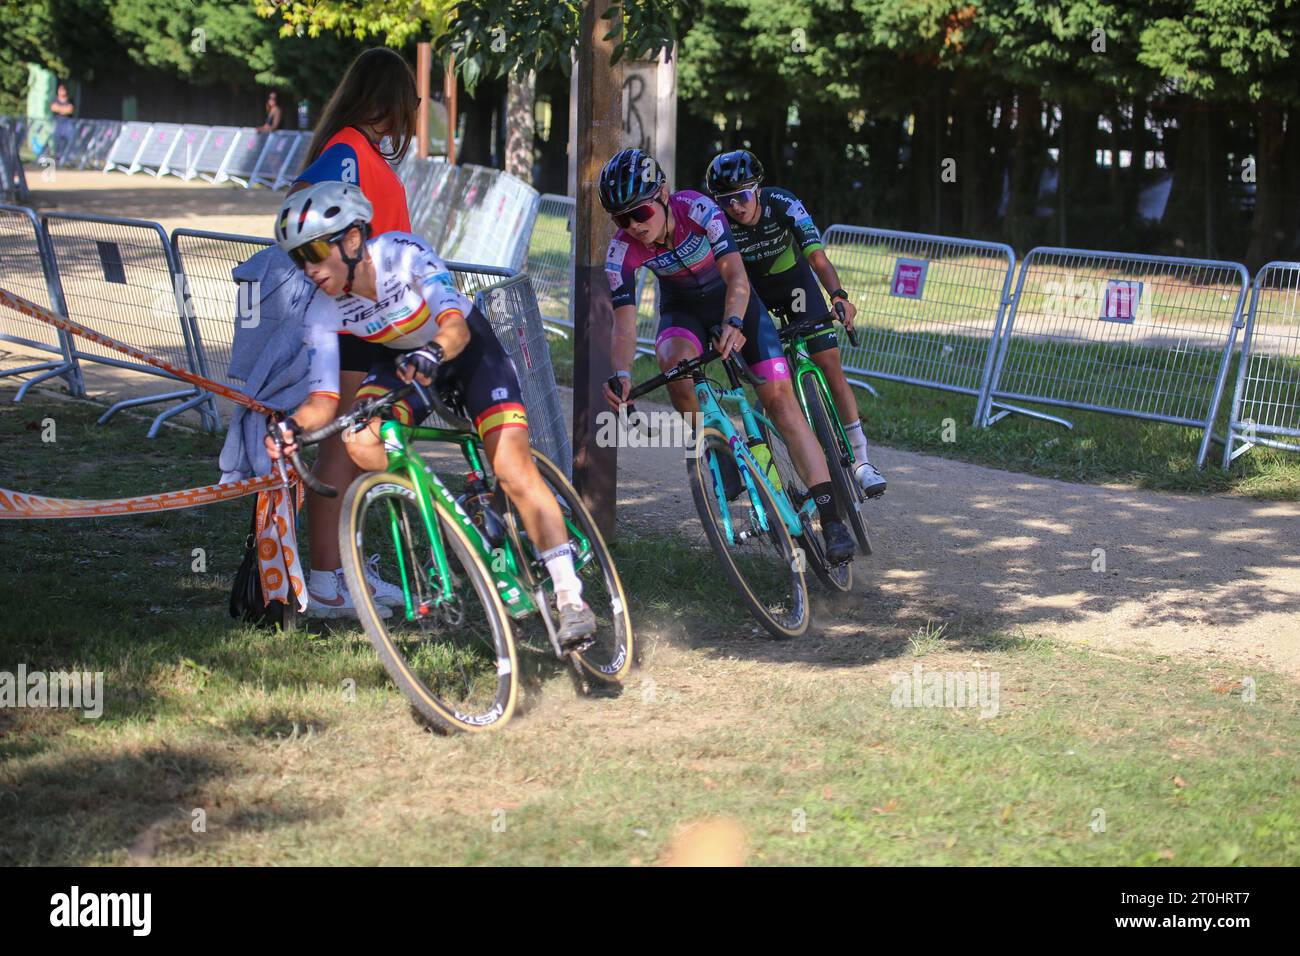 Pontevedra, Spain, 07th October, 2023: Nesta - MMR CX Team cyclist Lucia Gonzalez (1, L) leads the race followed by Laura Verdonschot (2) and Sofia Rodriguez (3, R) during the women's elite race of the Grand Prix Cidade de Pontevedra 2023, on October 7, 2023, in Pontevedra, Spain. Credit: Alberto Brevers / Alamy Live News. Stock Photo